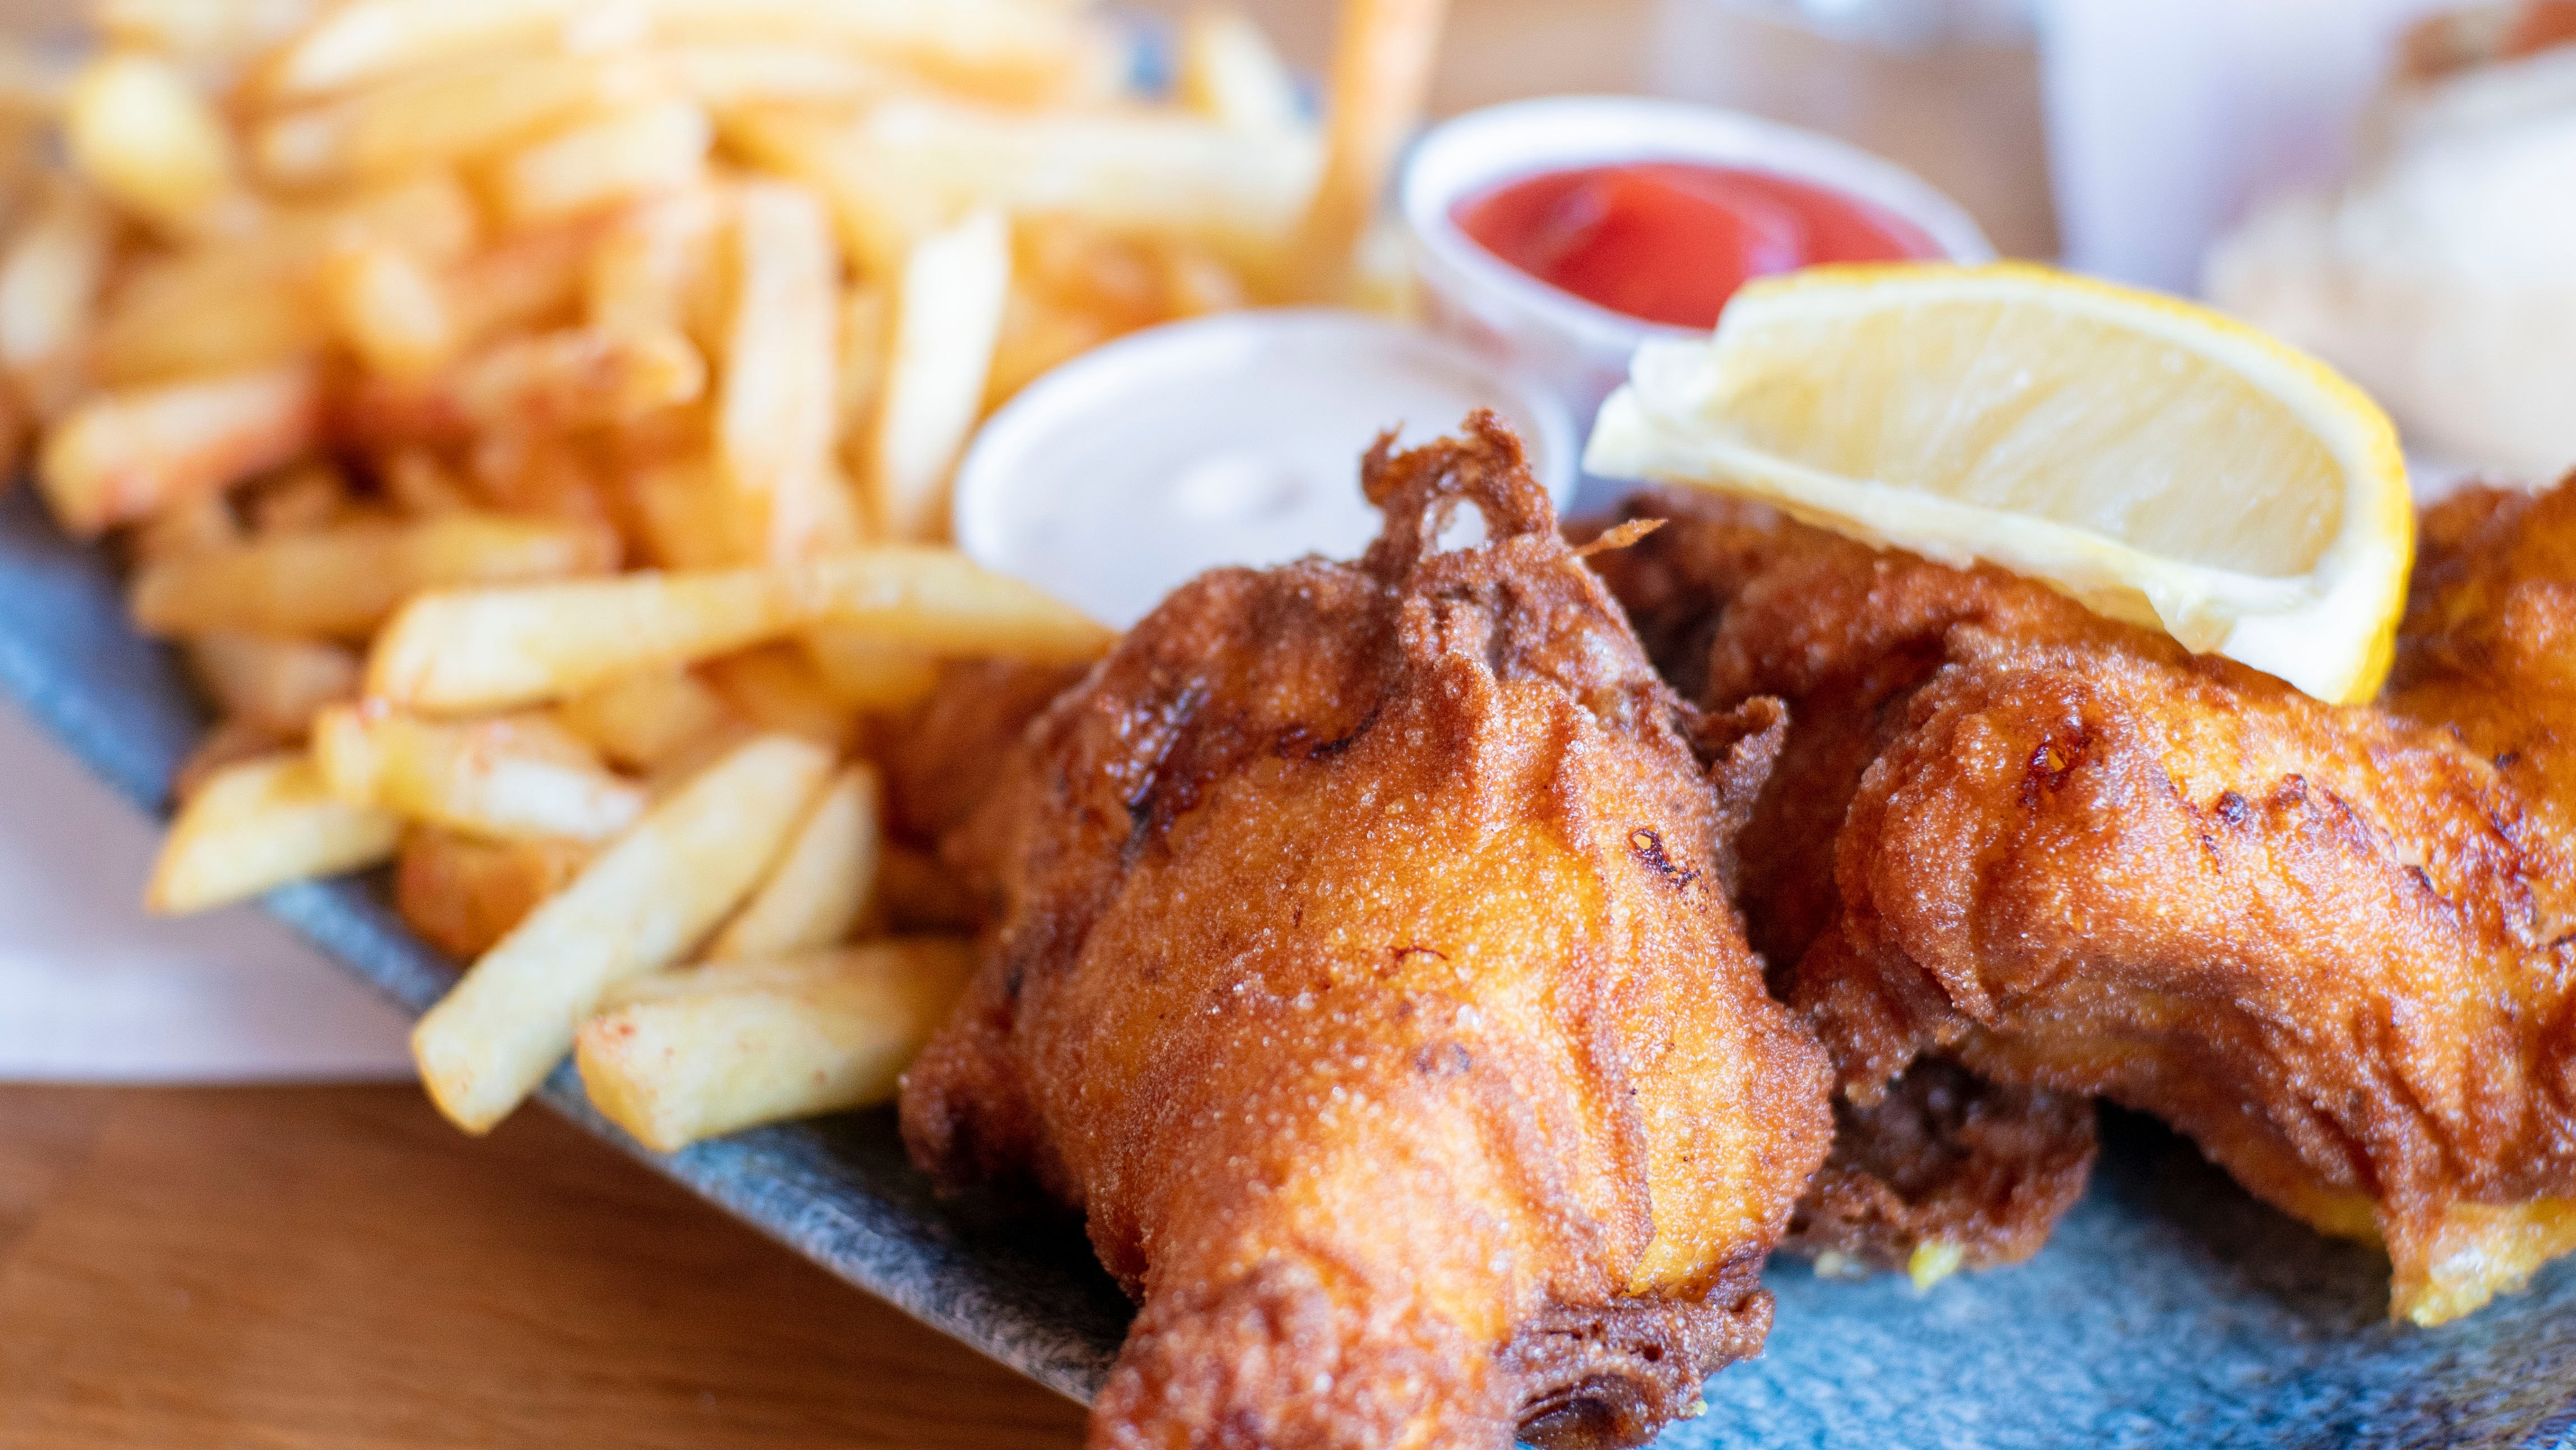 Fish Friday: Get Your Classic British Fish and Chips from These Places